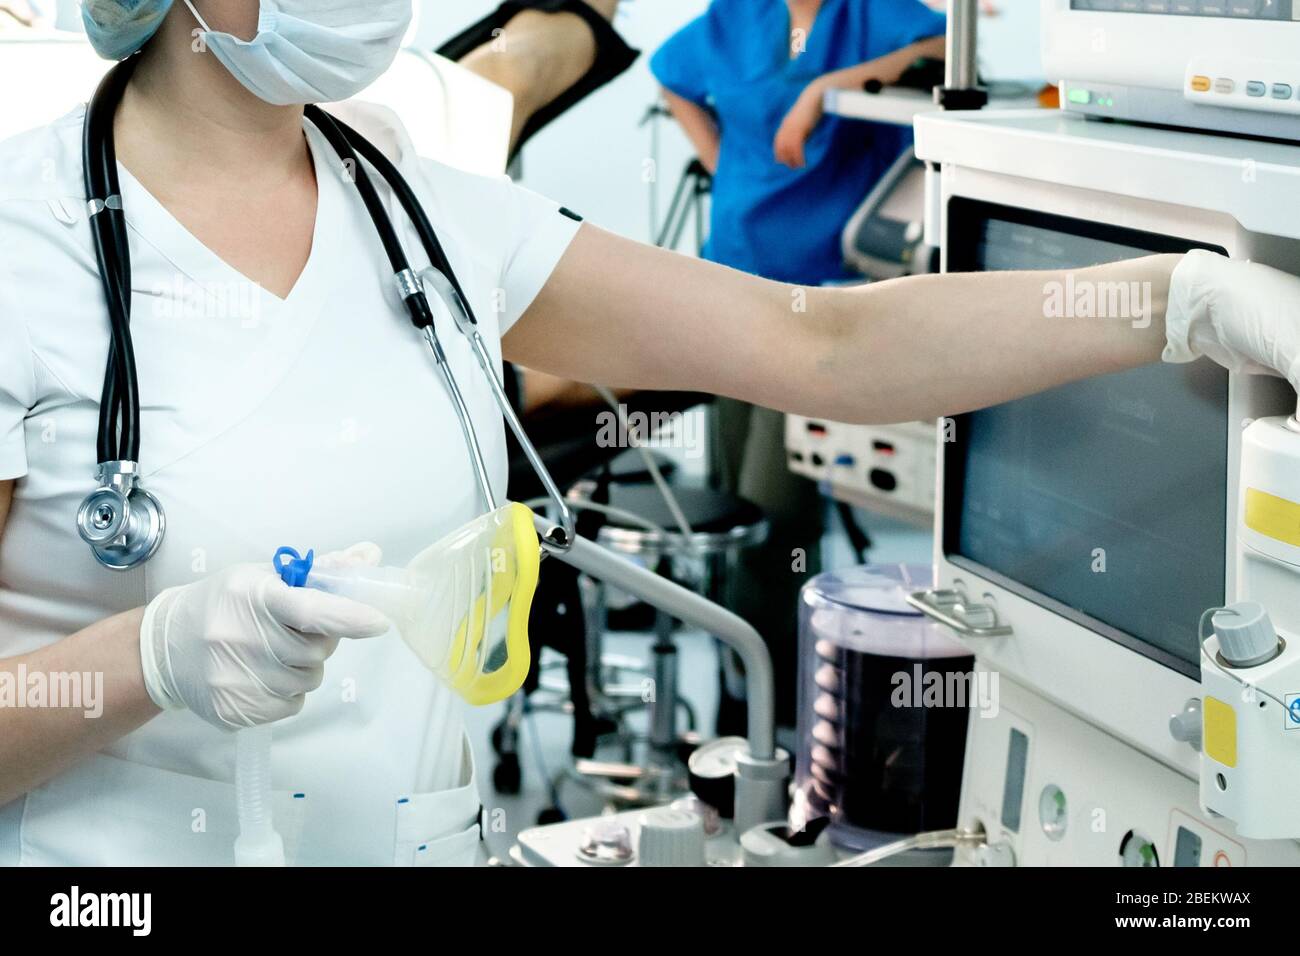 An intensive care physician prepares equipment for artificial ventilation of the lungs for intubation in a critical patient with coronavirus. COVID-19 Stock Photo